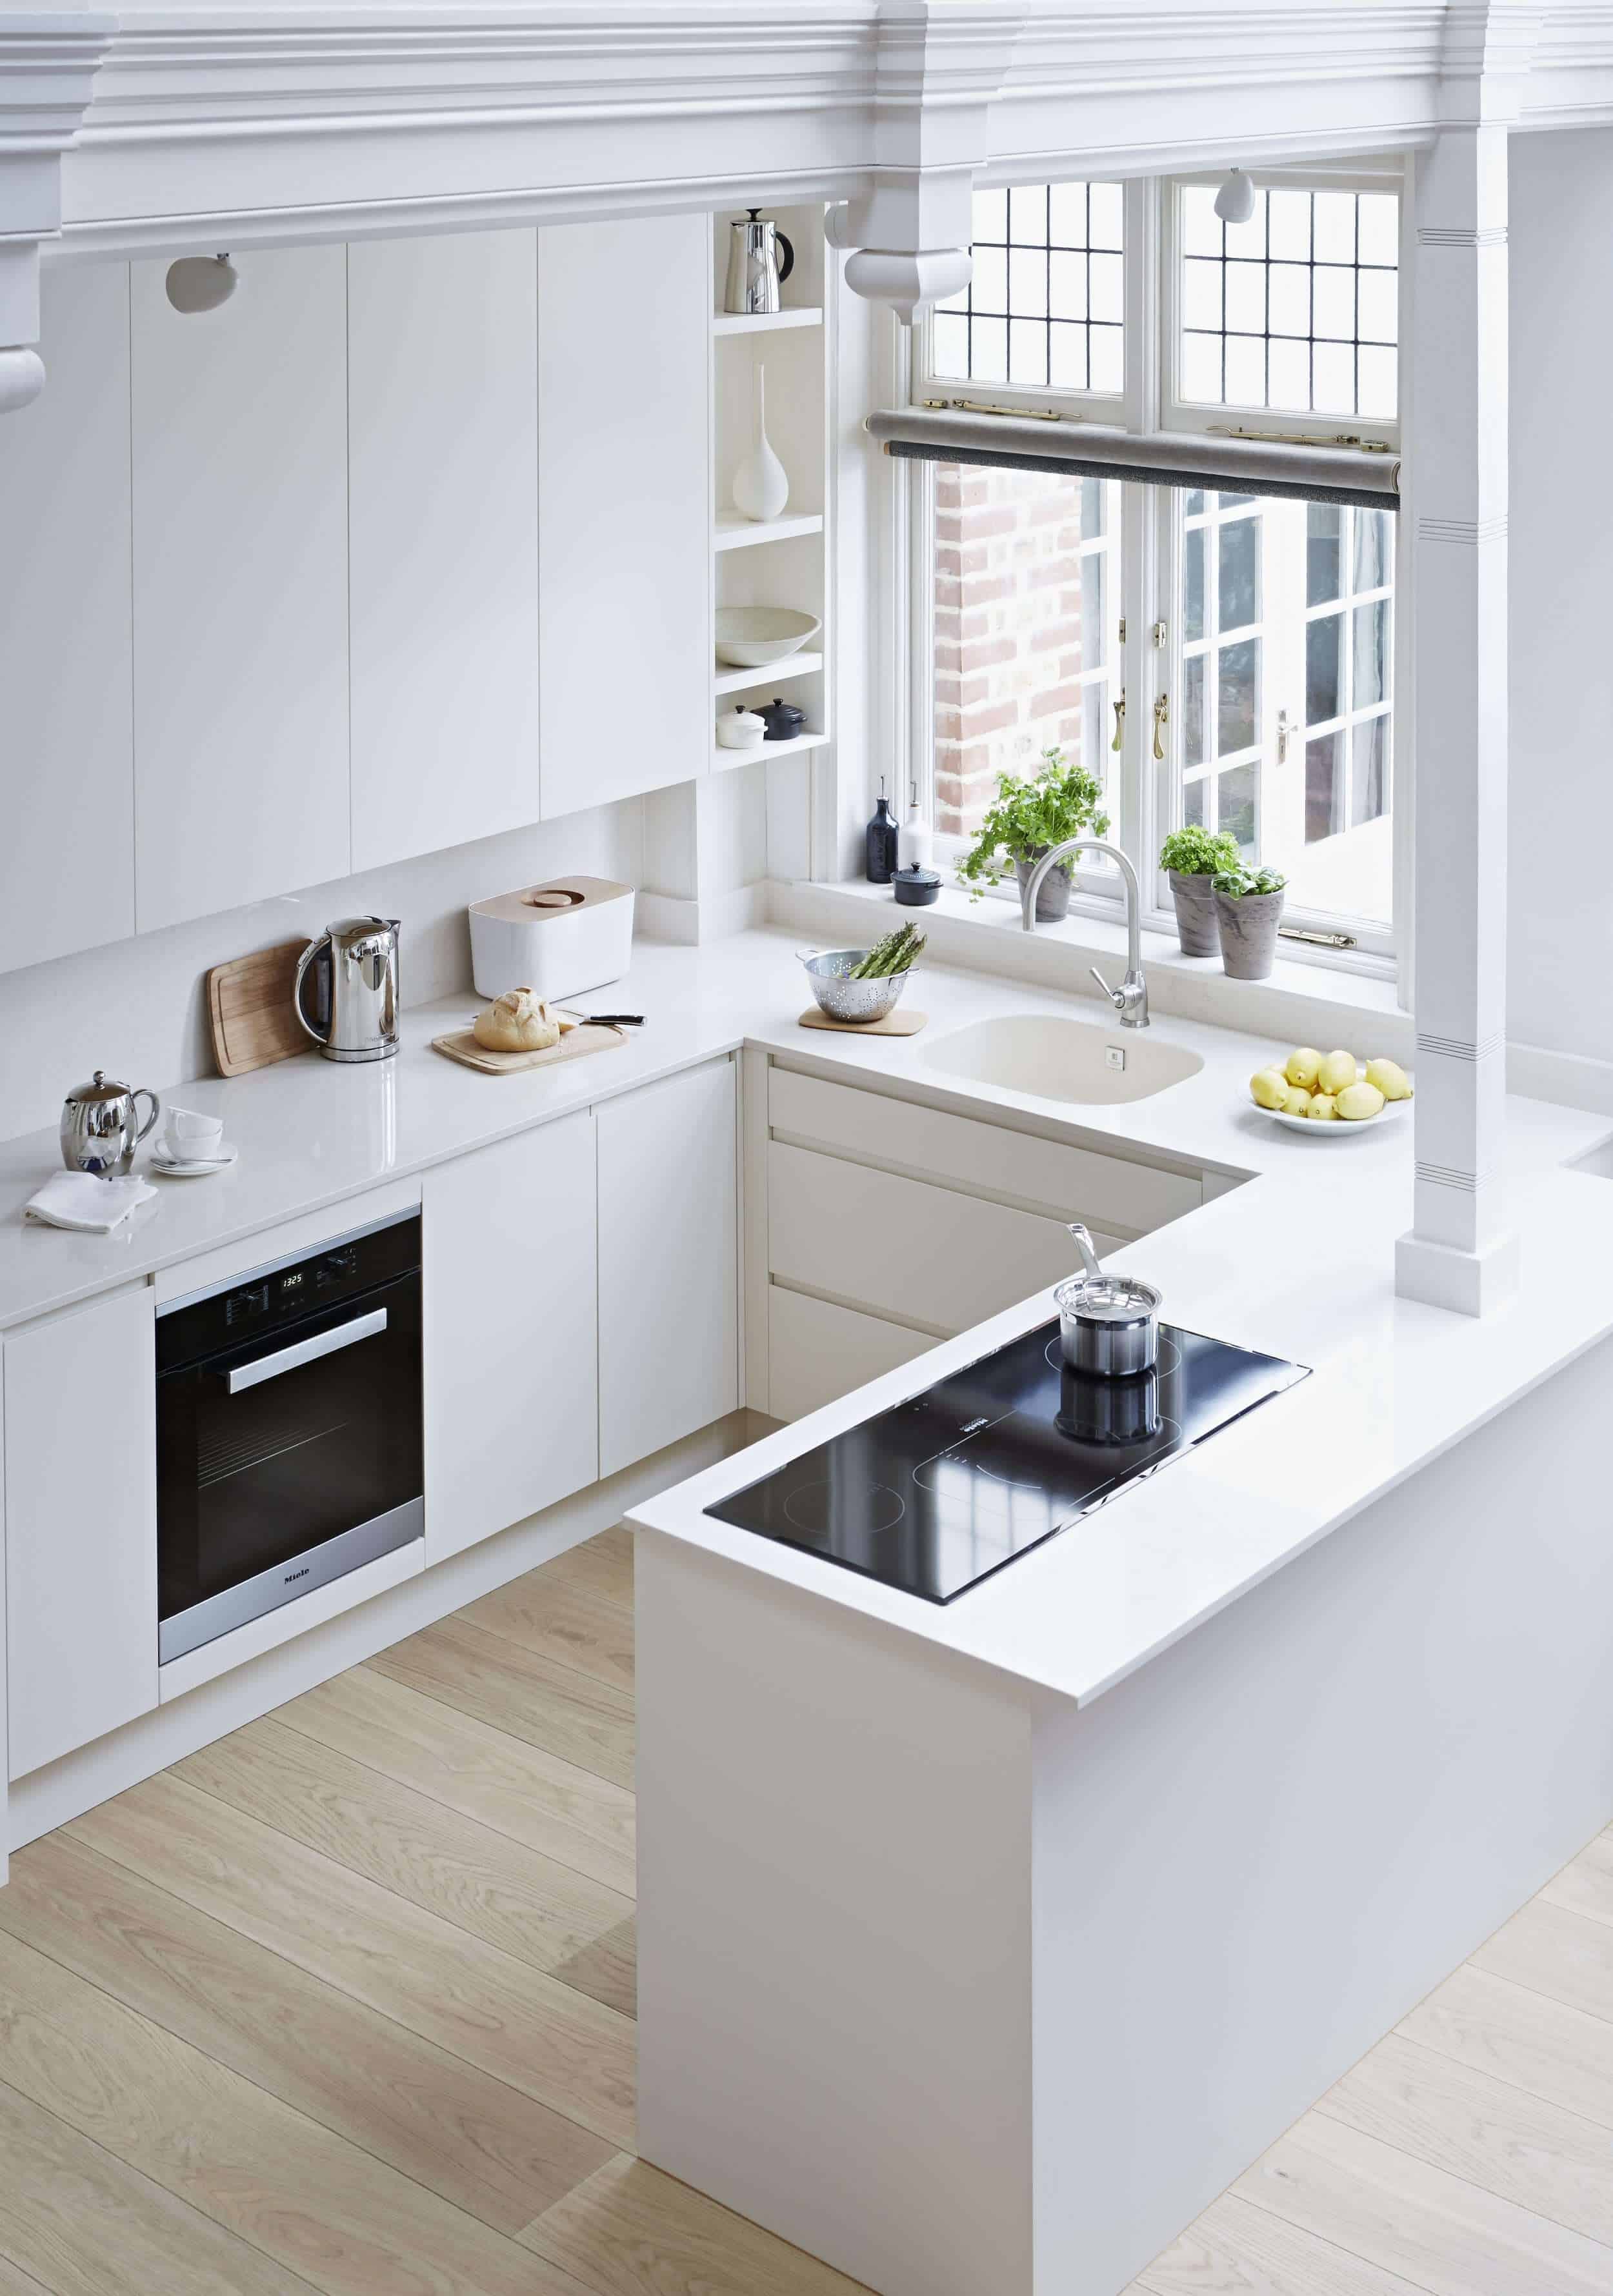 Pure White Handleless Kitchen John Lewis of Hungerford